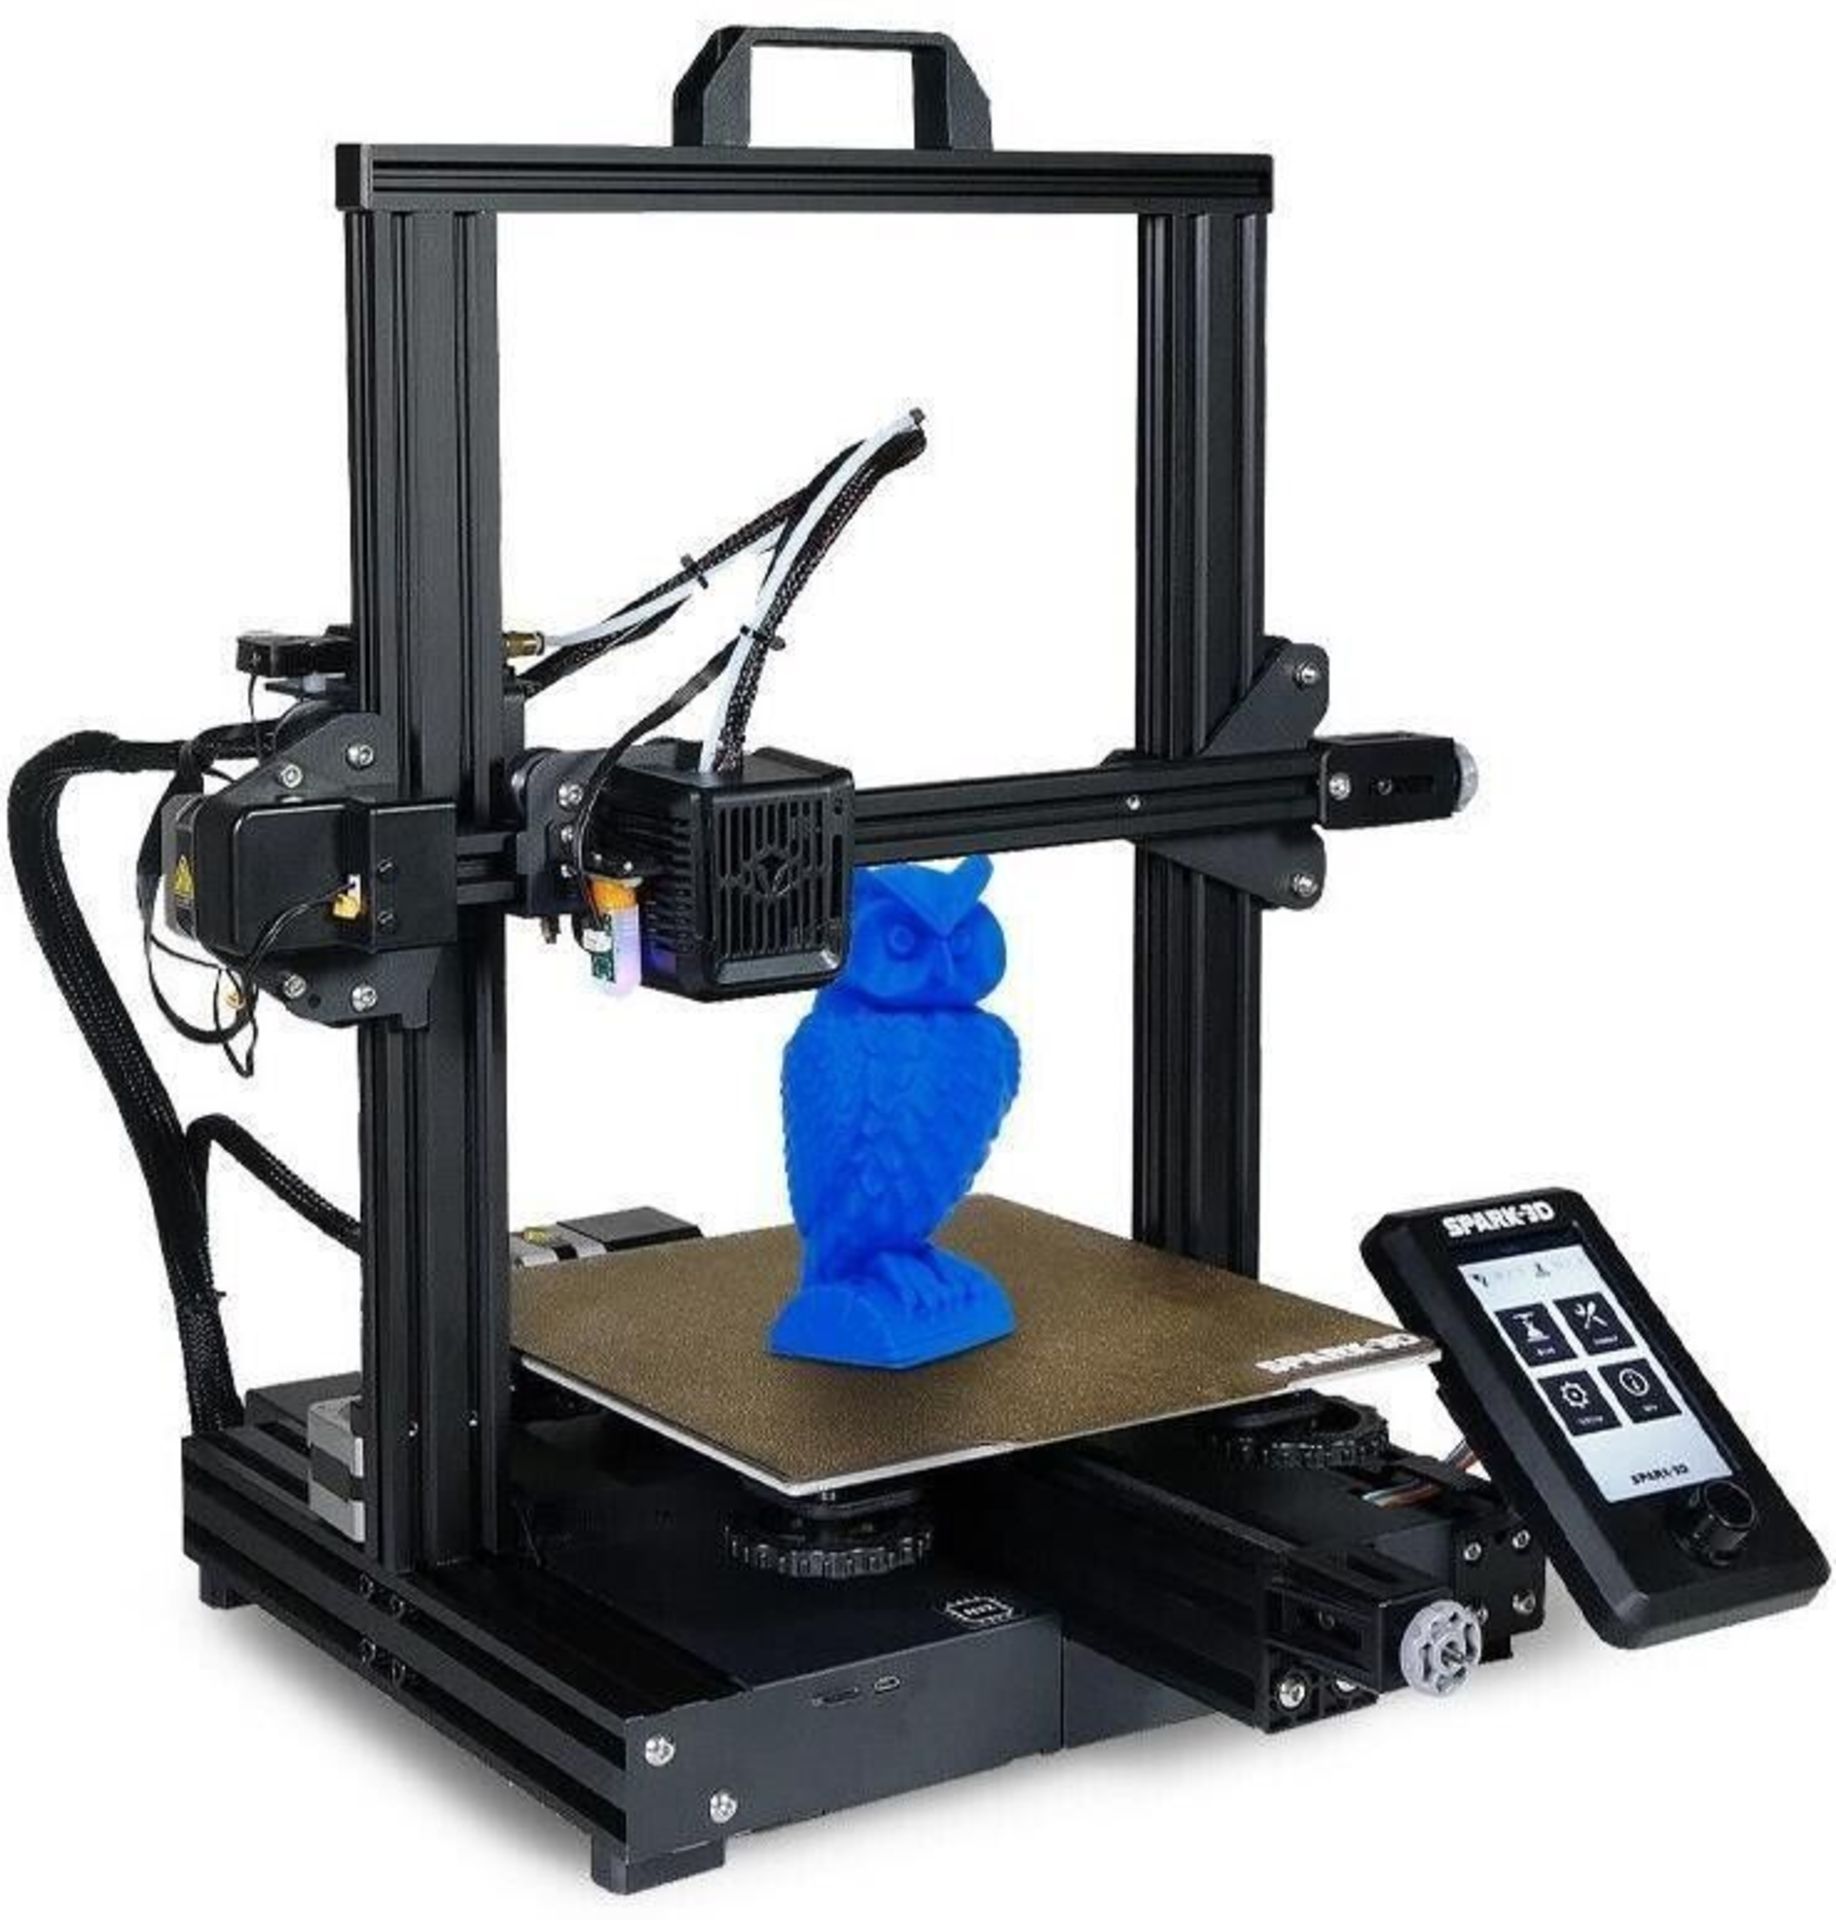 BRAND NEW FACTORY SEALED SPARK-3D SP1 3D Printer. RRP £294.95. Revamp your imagination with the